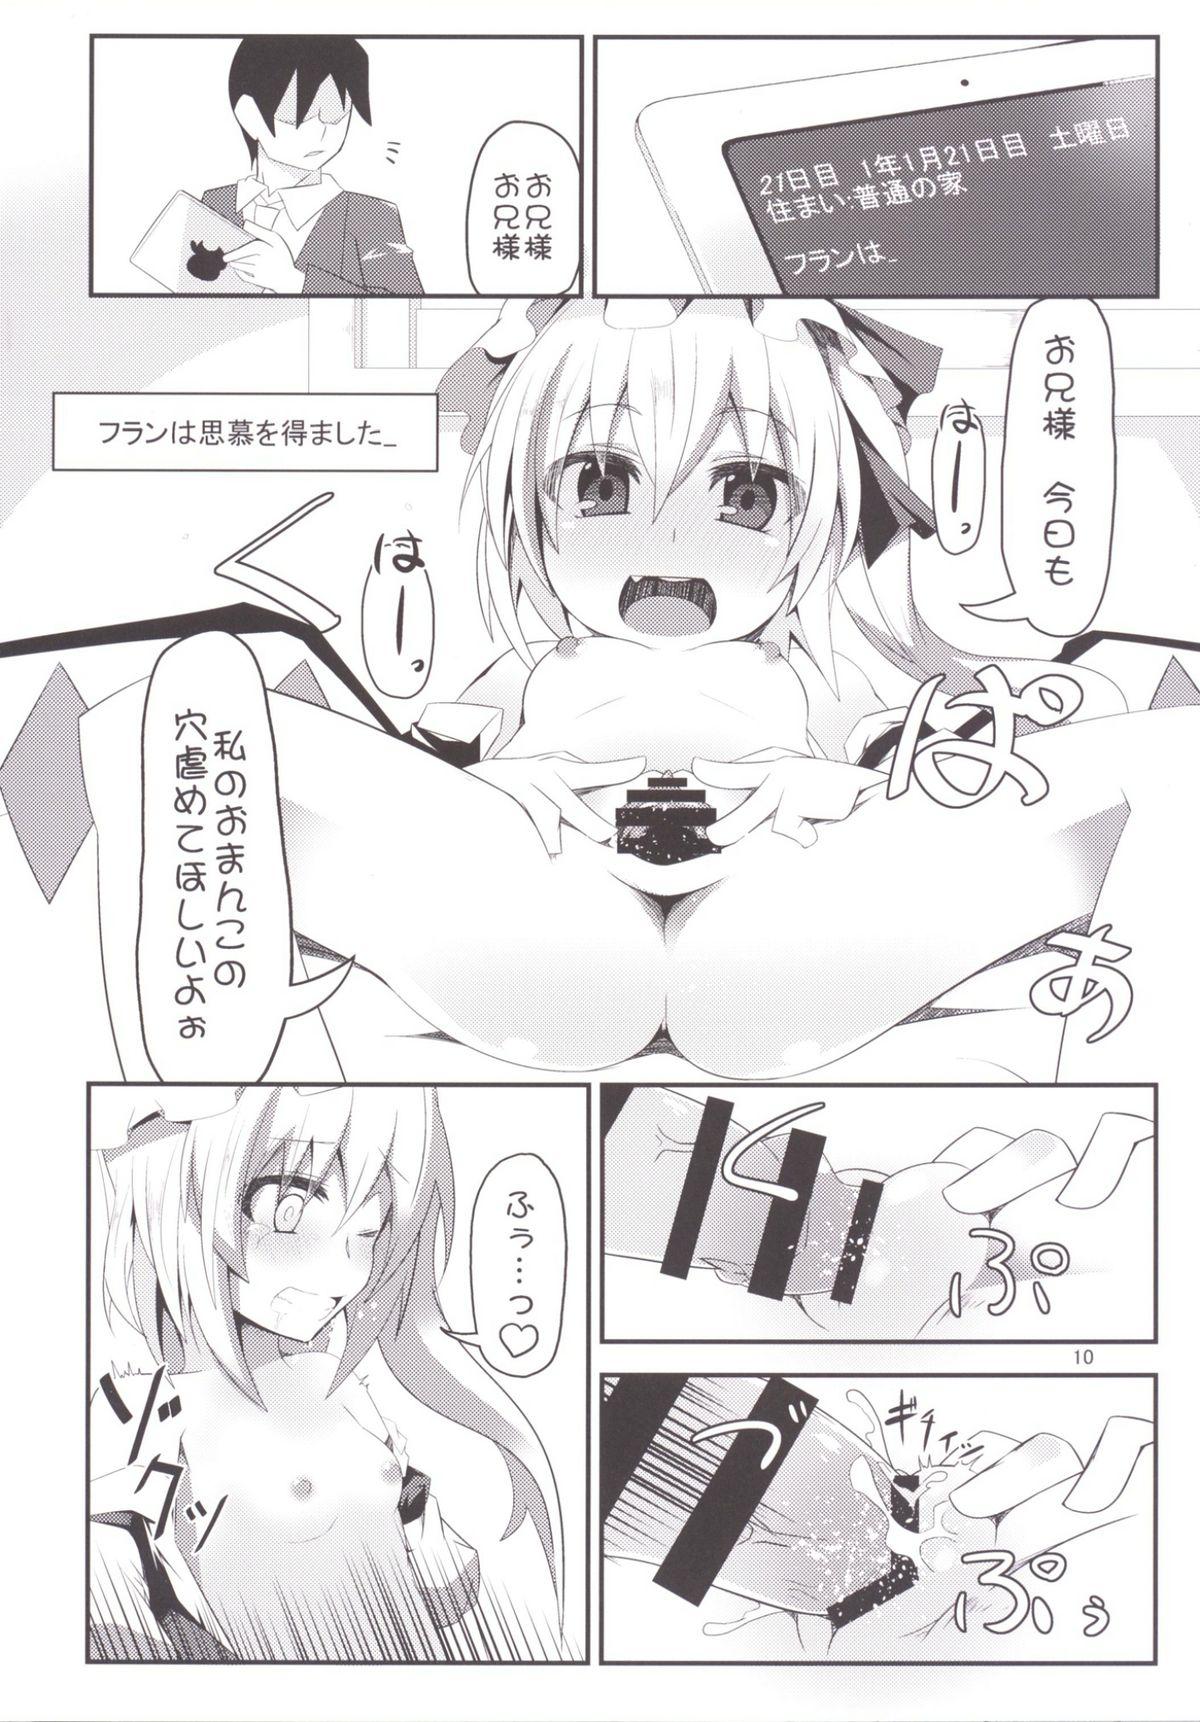 Spreading er@Flan - Touhou project Goldenshower - Page 10